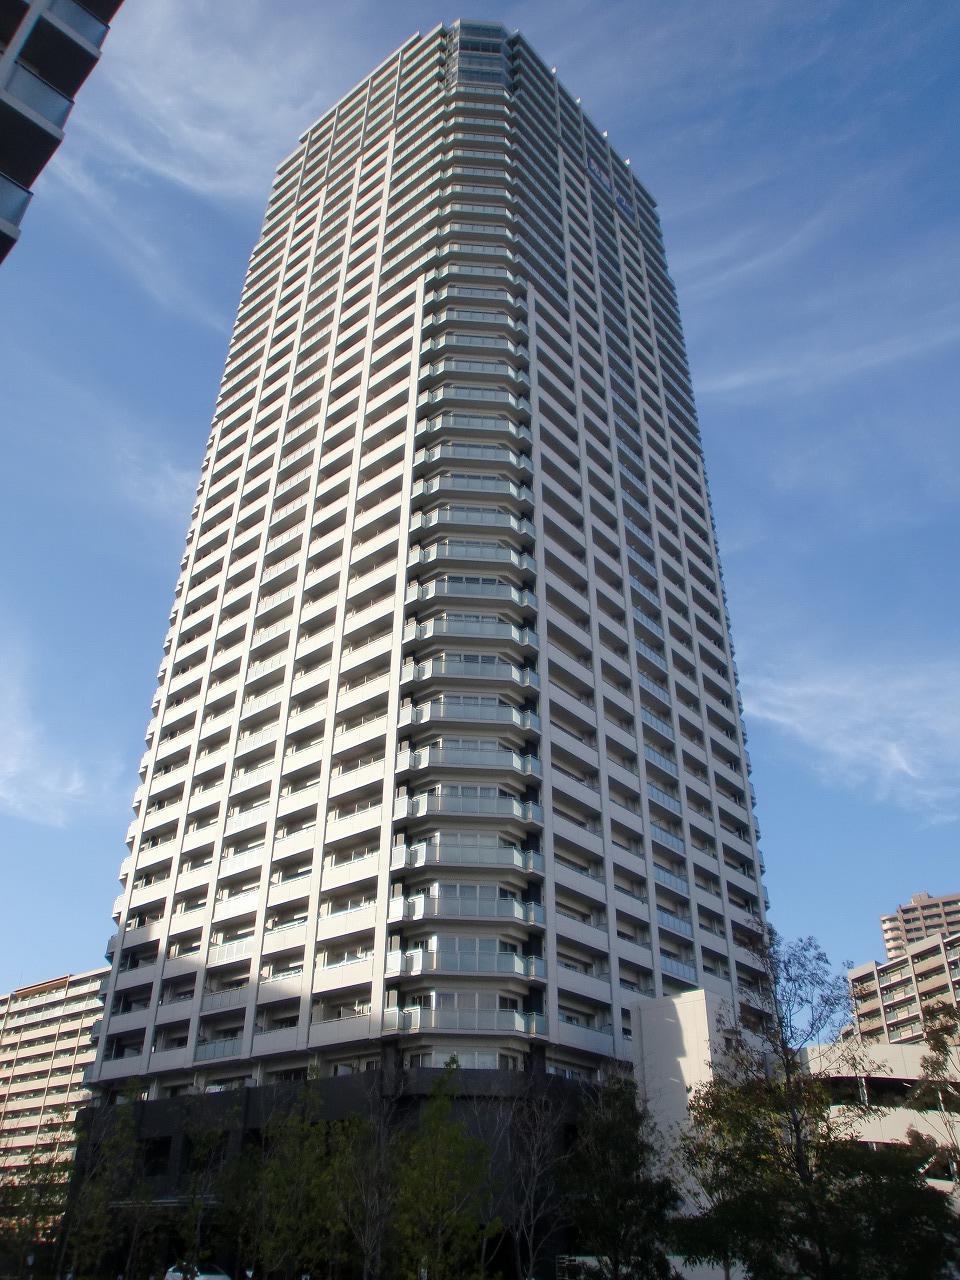 Local appearance photo. Tower's appearance. It is a symbol of modern architecture.